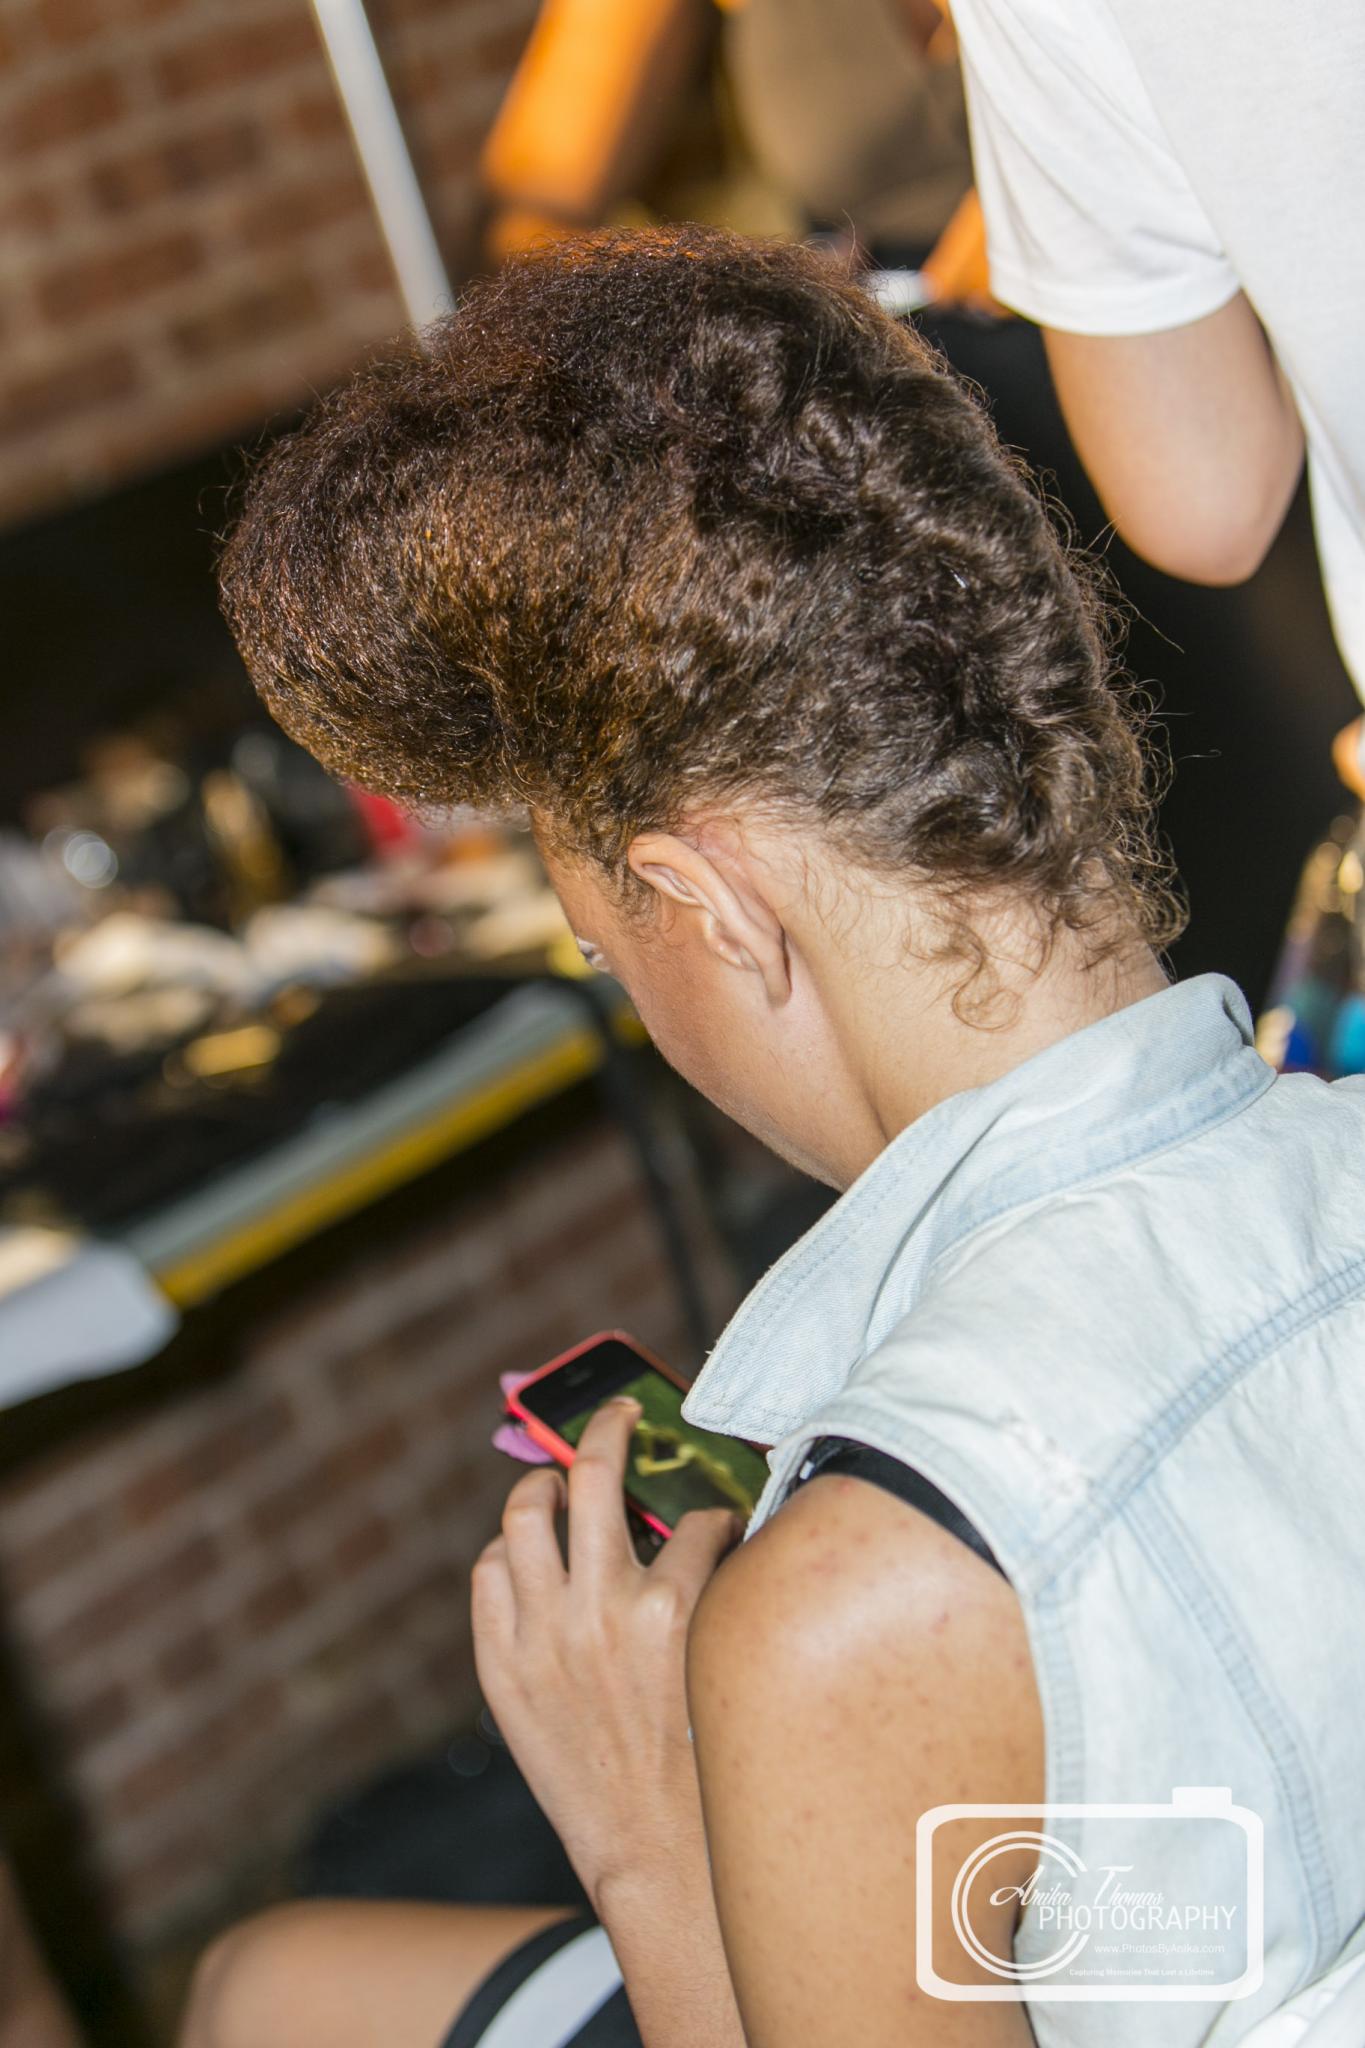 Pompadours and Milkmaid Braids Take Over The Harlem Fashion Row Runway